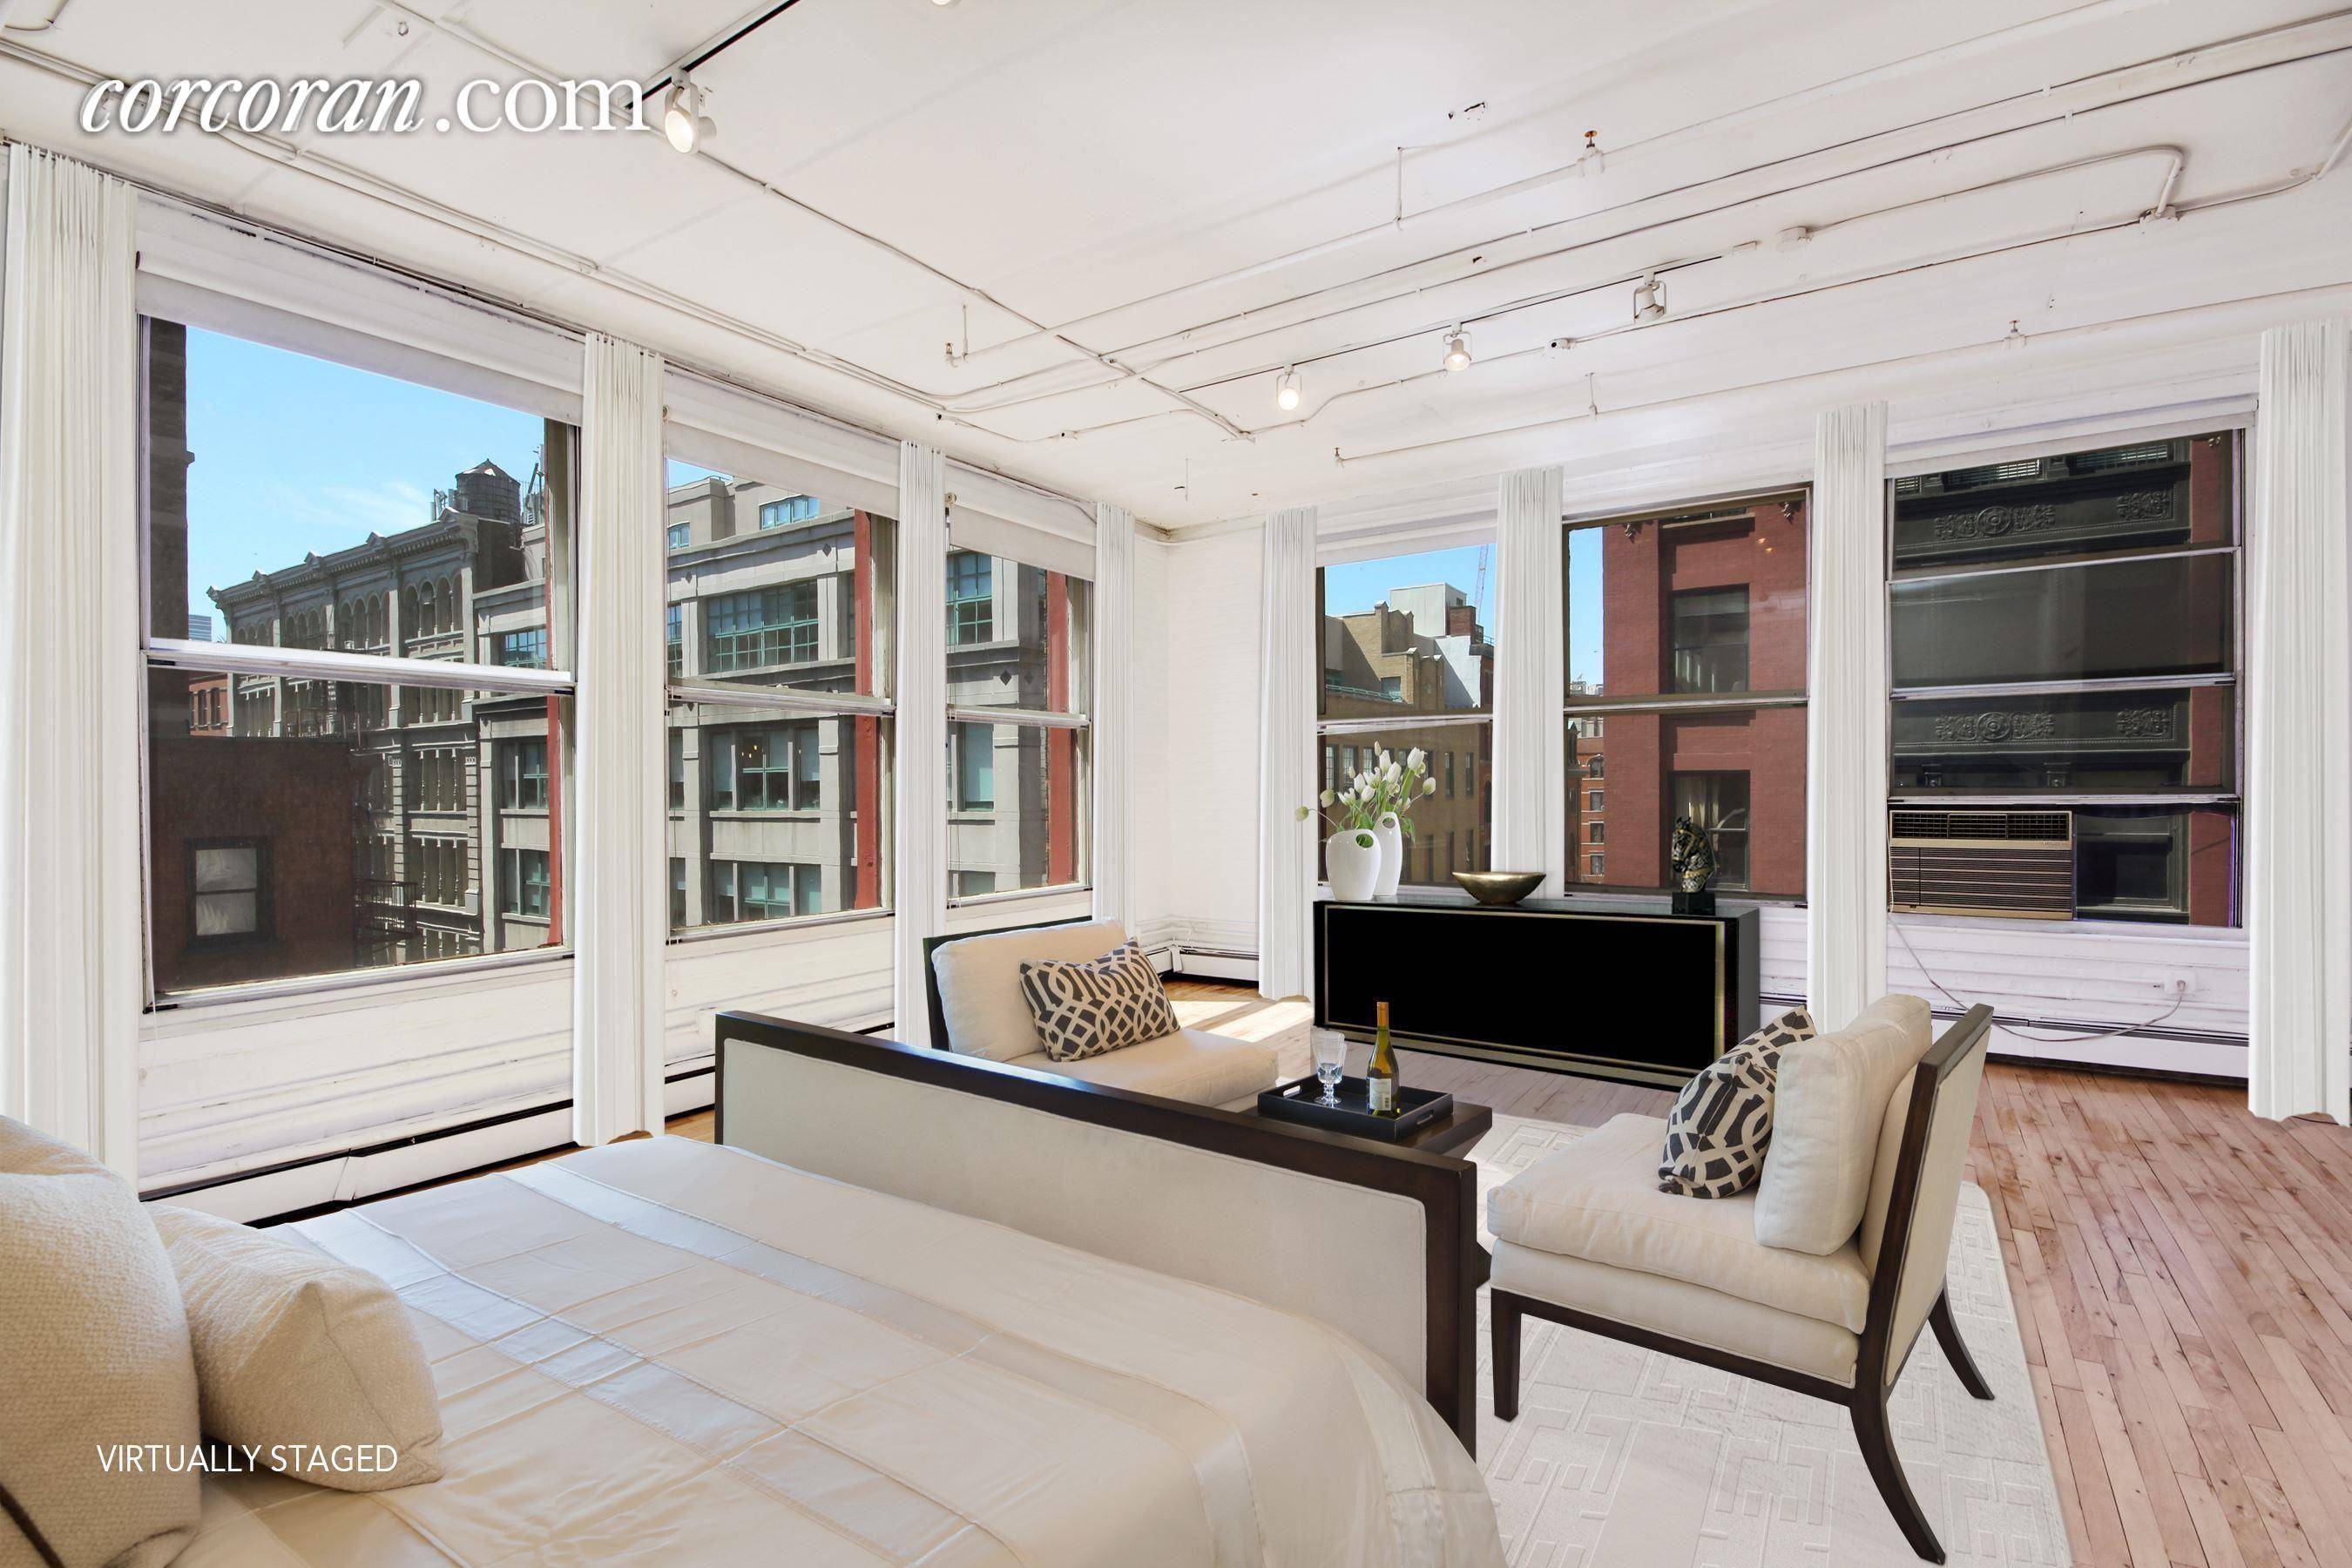 132 Wooster Street Apartment 4 is a classic full floor SoHo loft with breathtaking natural light.